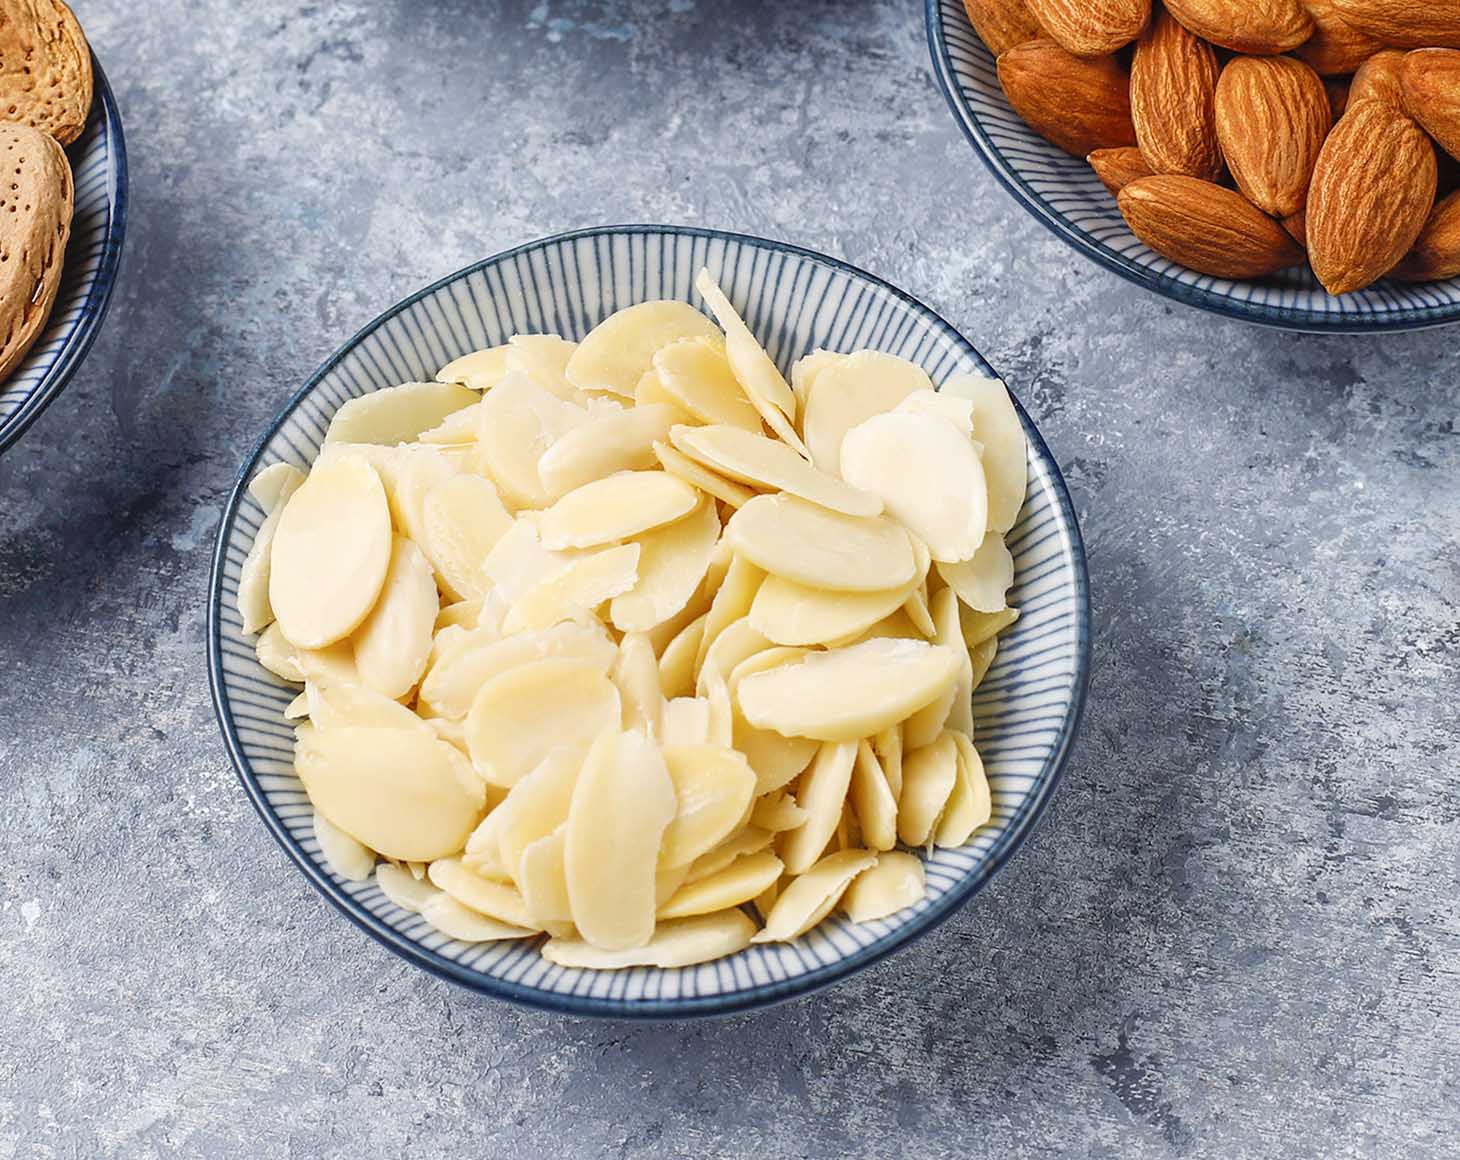 blanched-sliced-almonds-2-web-min